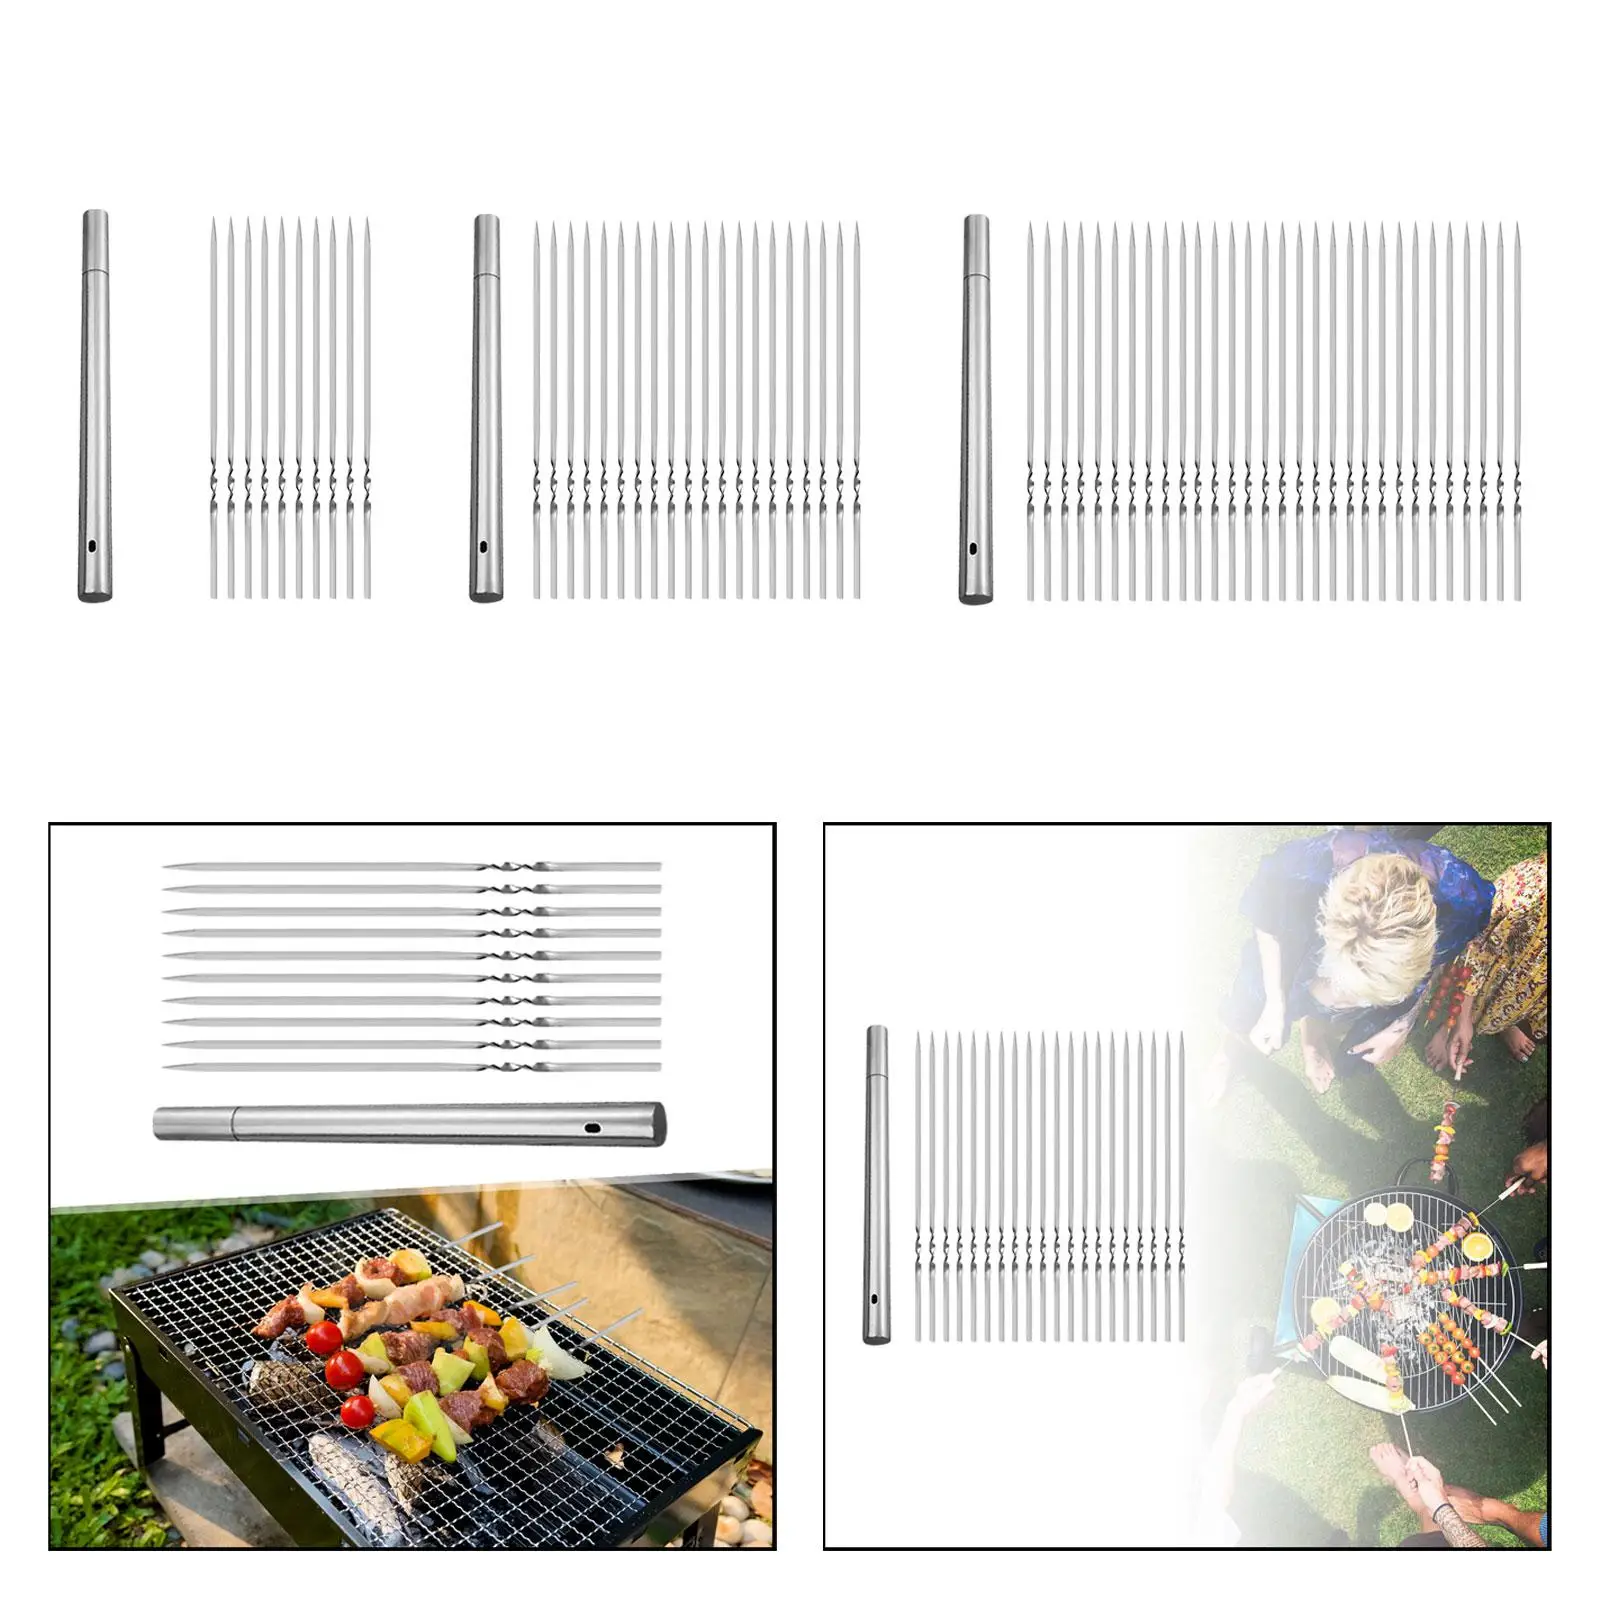 Barbecue Skewers Stainless Steel Grilling BBQ Needle Stick Grilling Skewers